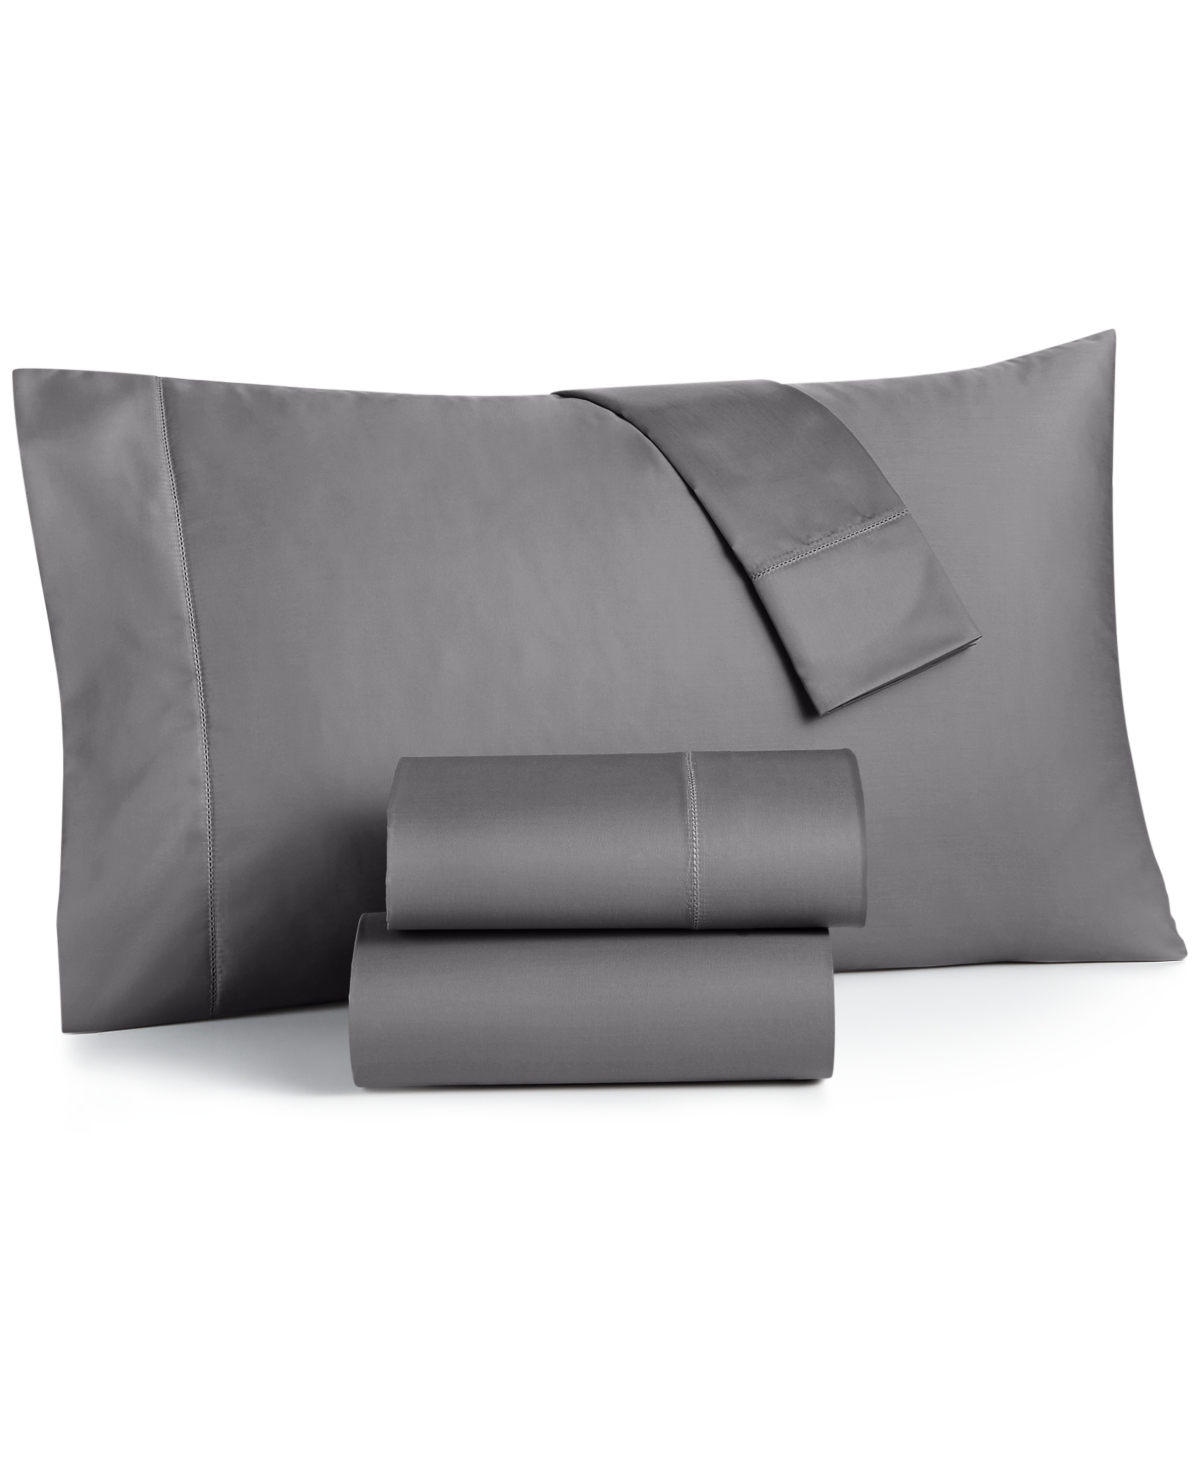 Charter Club Damask Solid Extra Deep Pocket 550 Thread Count 100% Cotton 4-pc. Sheet Set, California King, Create In Stone